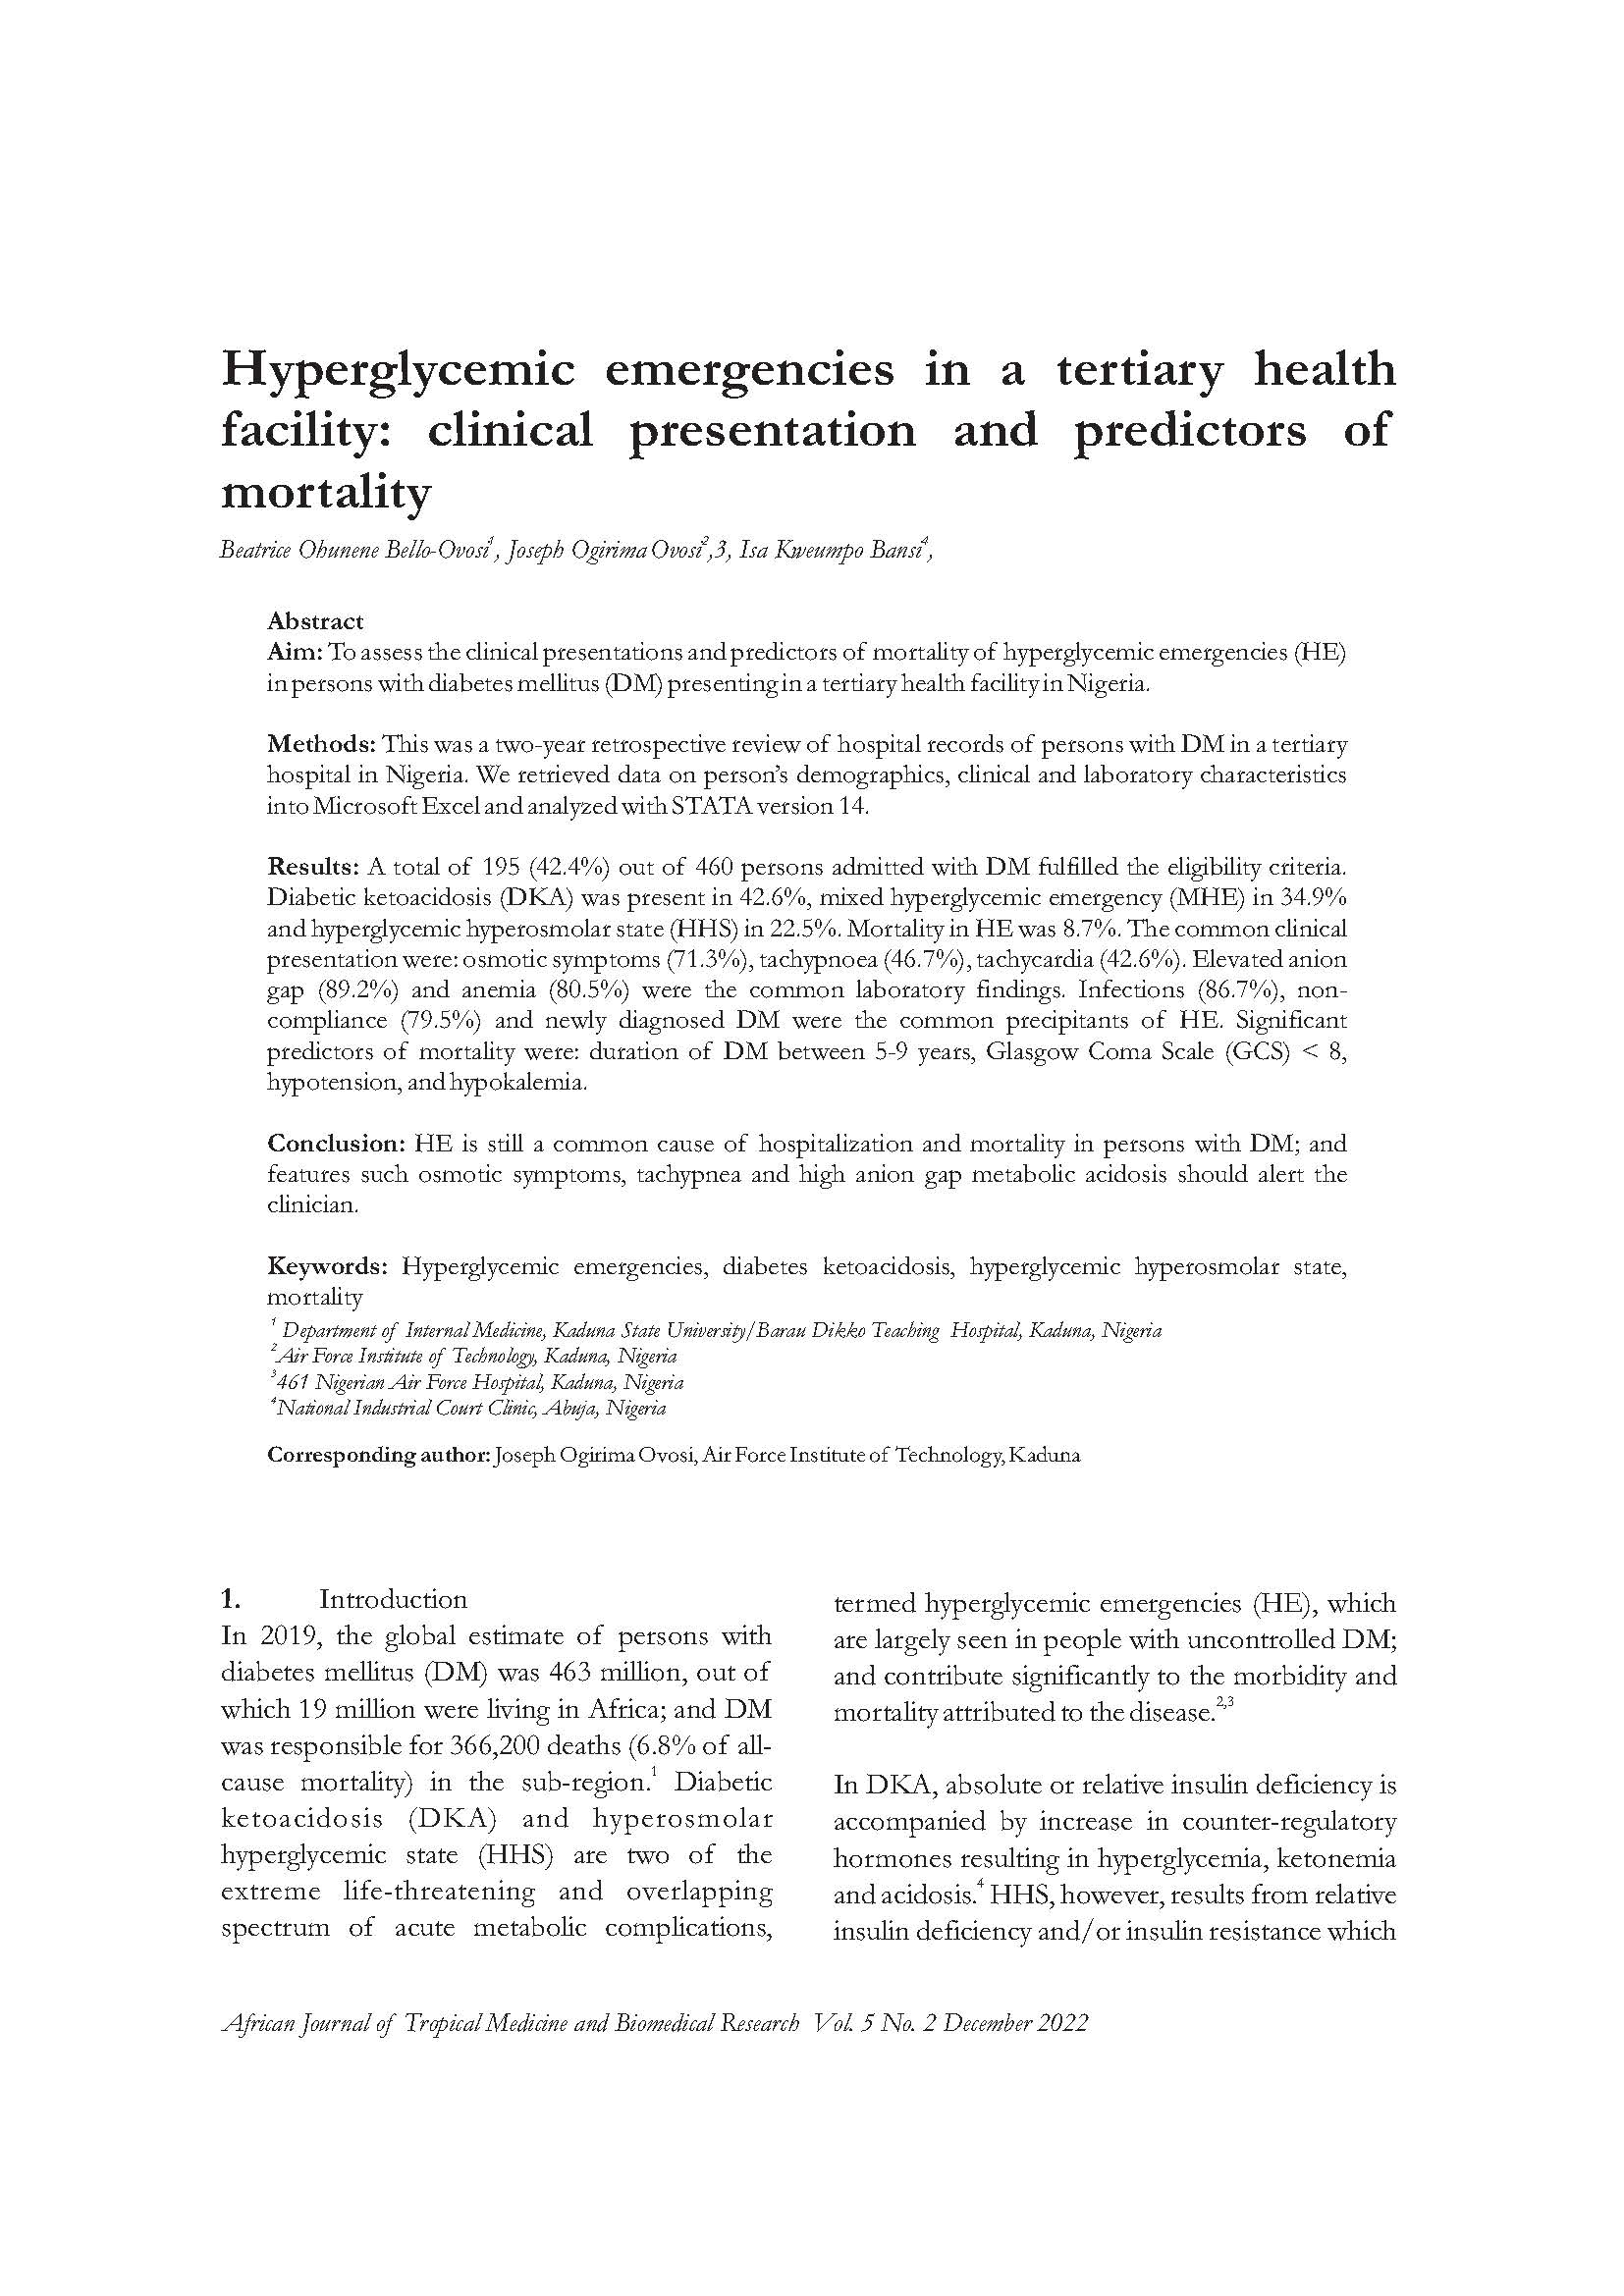 Hyperglycemic emergencies in a tertiary health facility: Clinical presentation and predictors of mortality